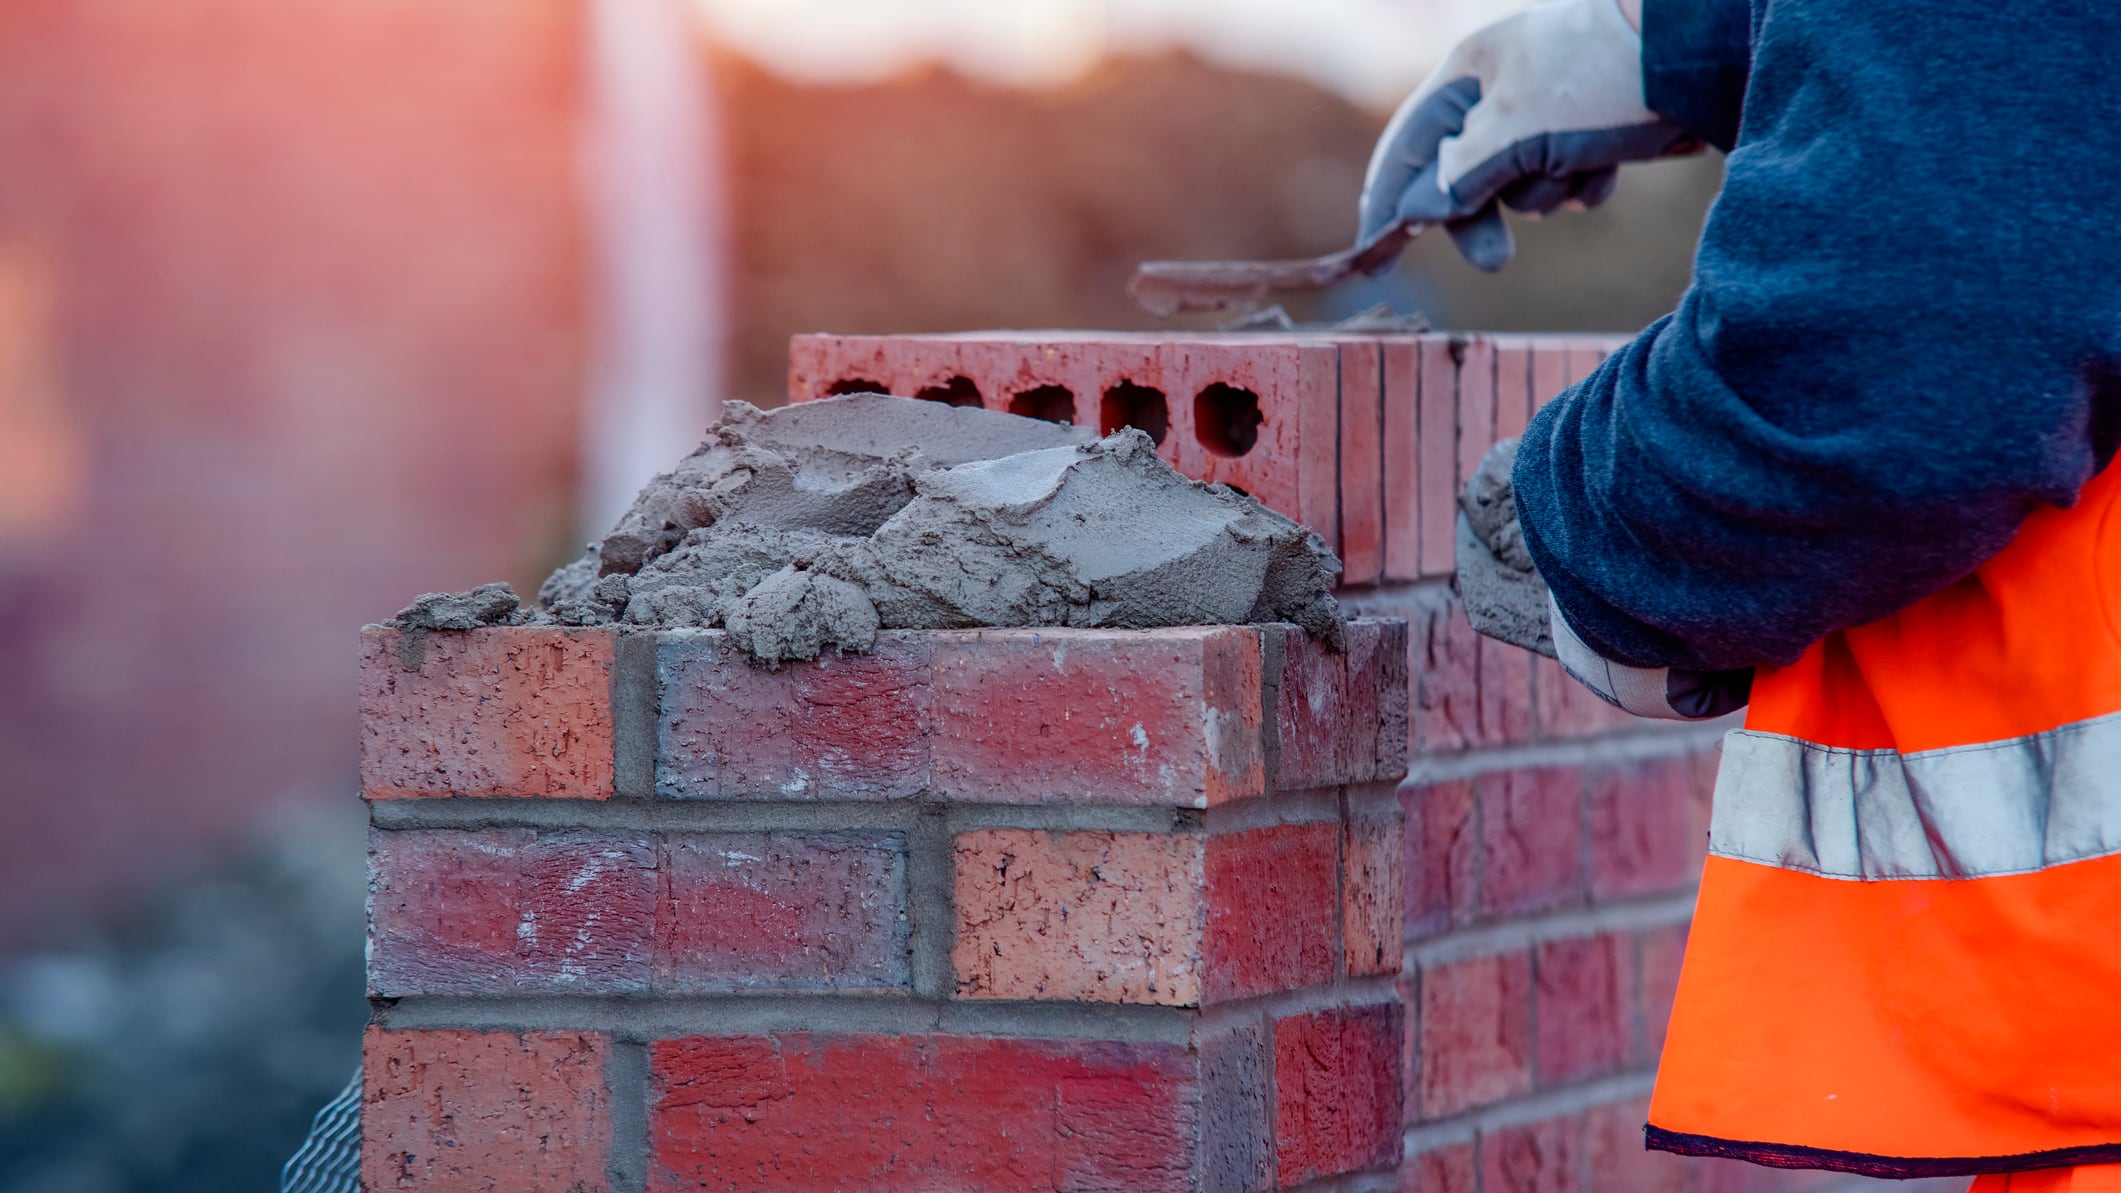 Close up of industrial bricklayer laying bricks on cement mix on construction site